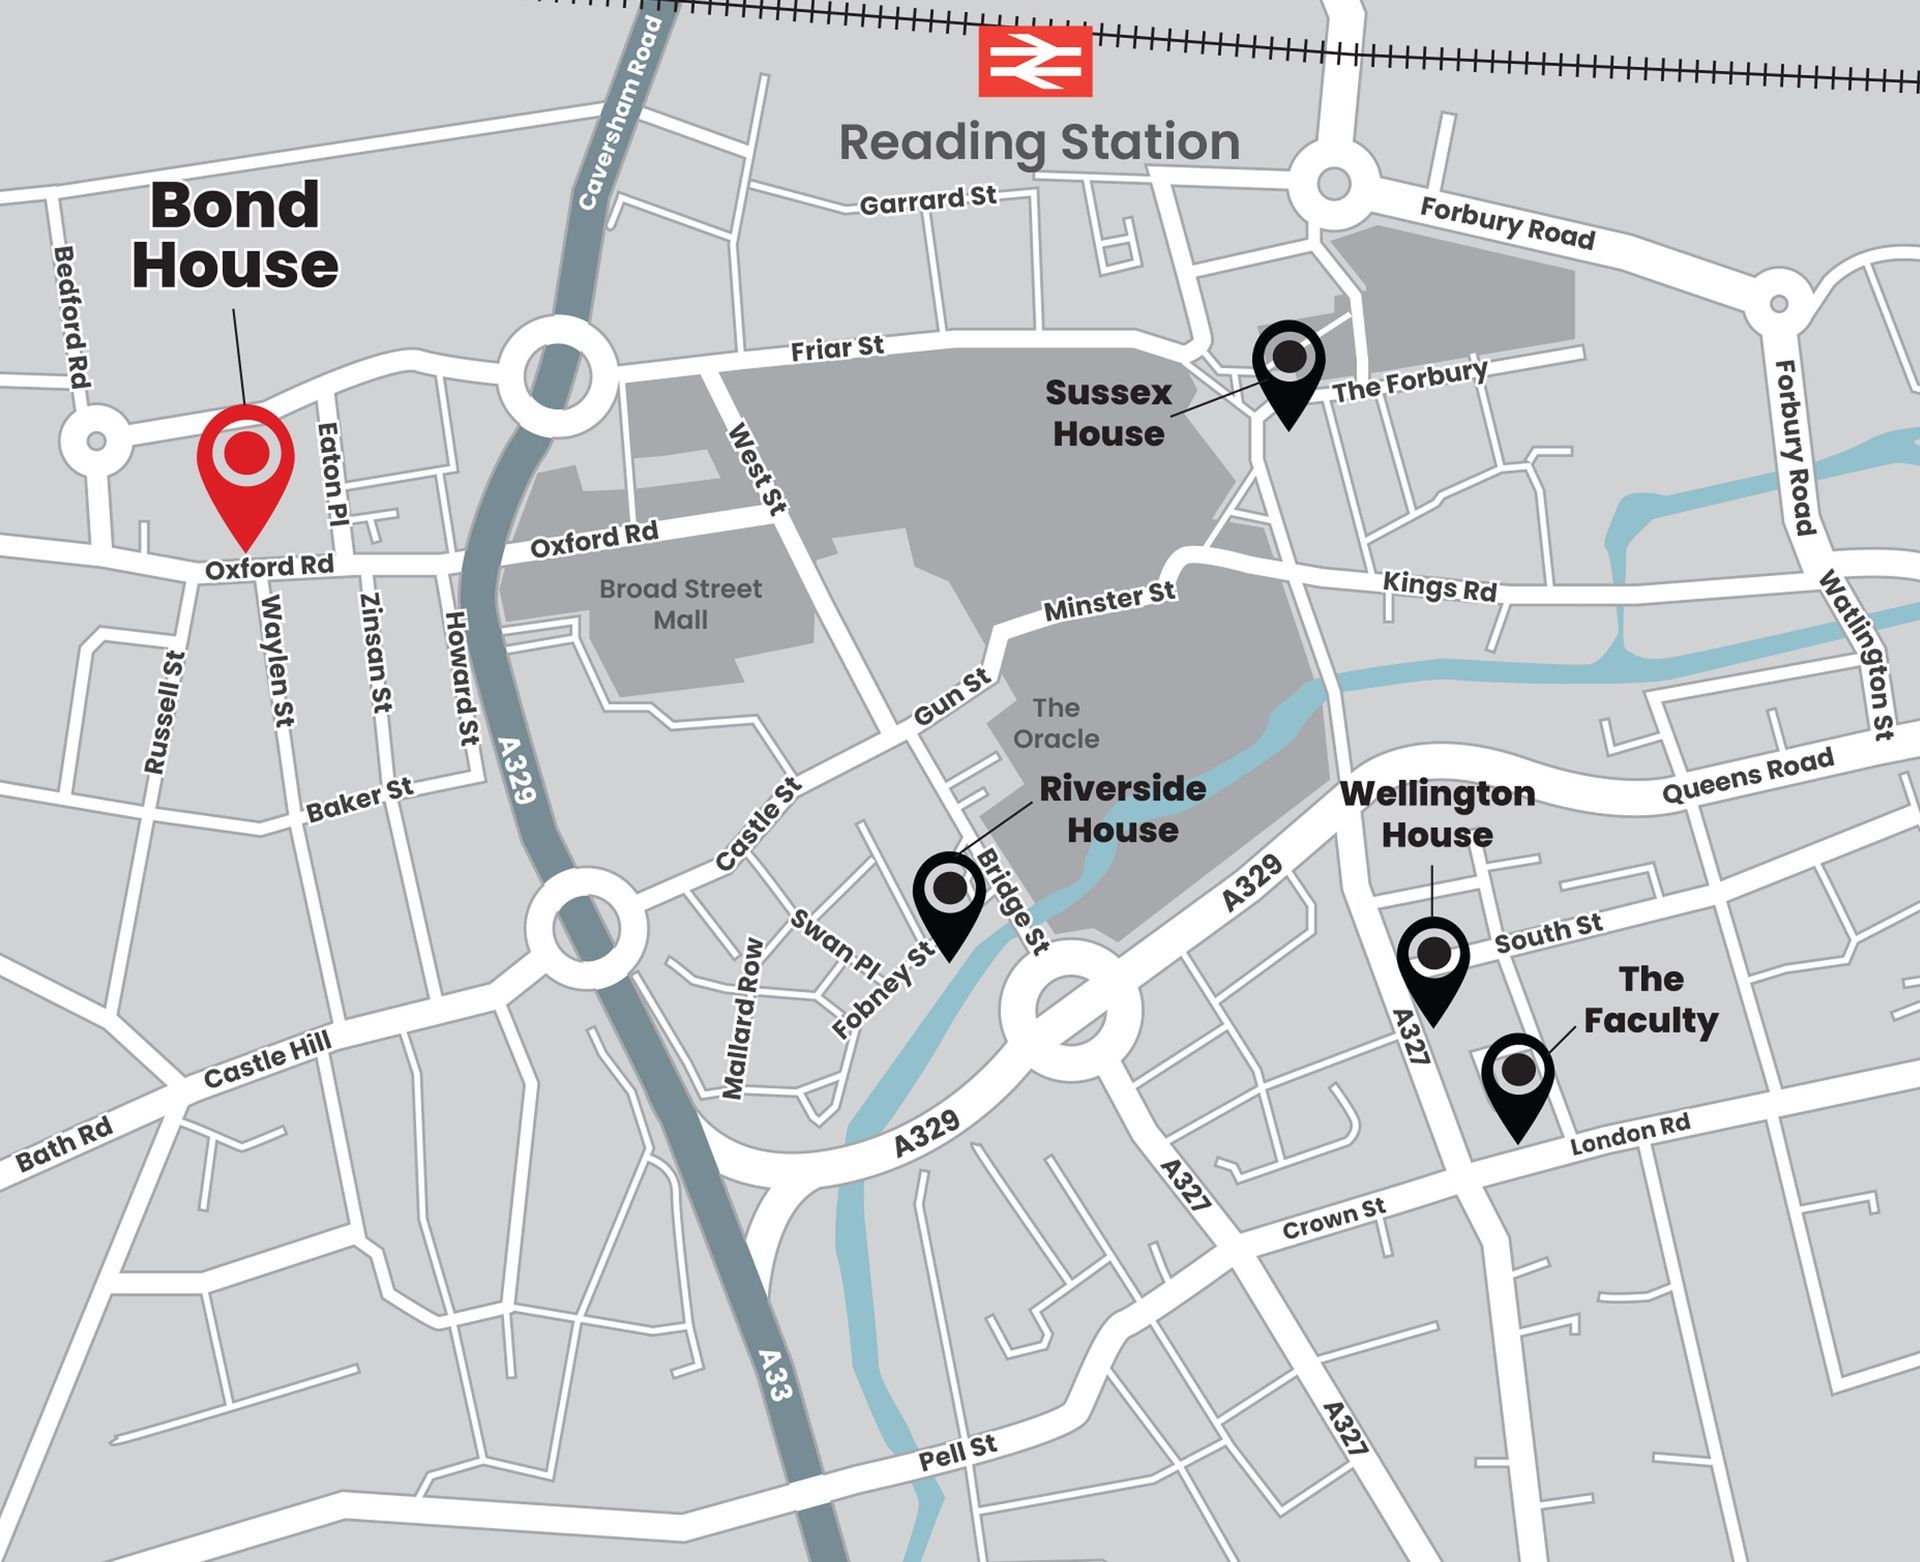 Bond House Serviced Apartments Map in Reading